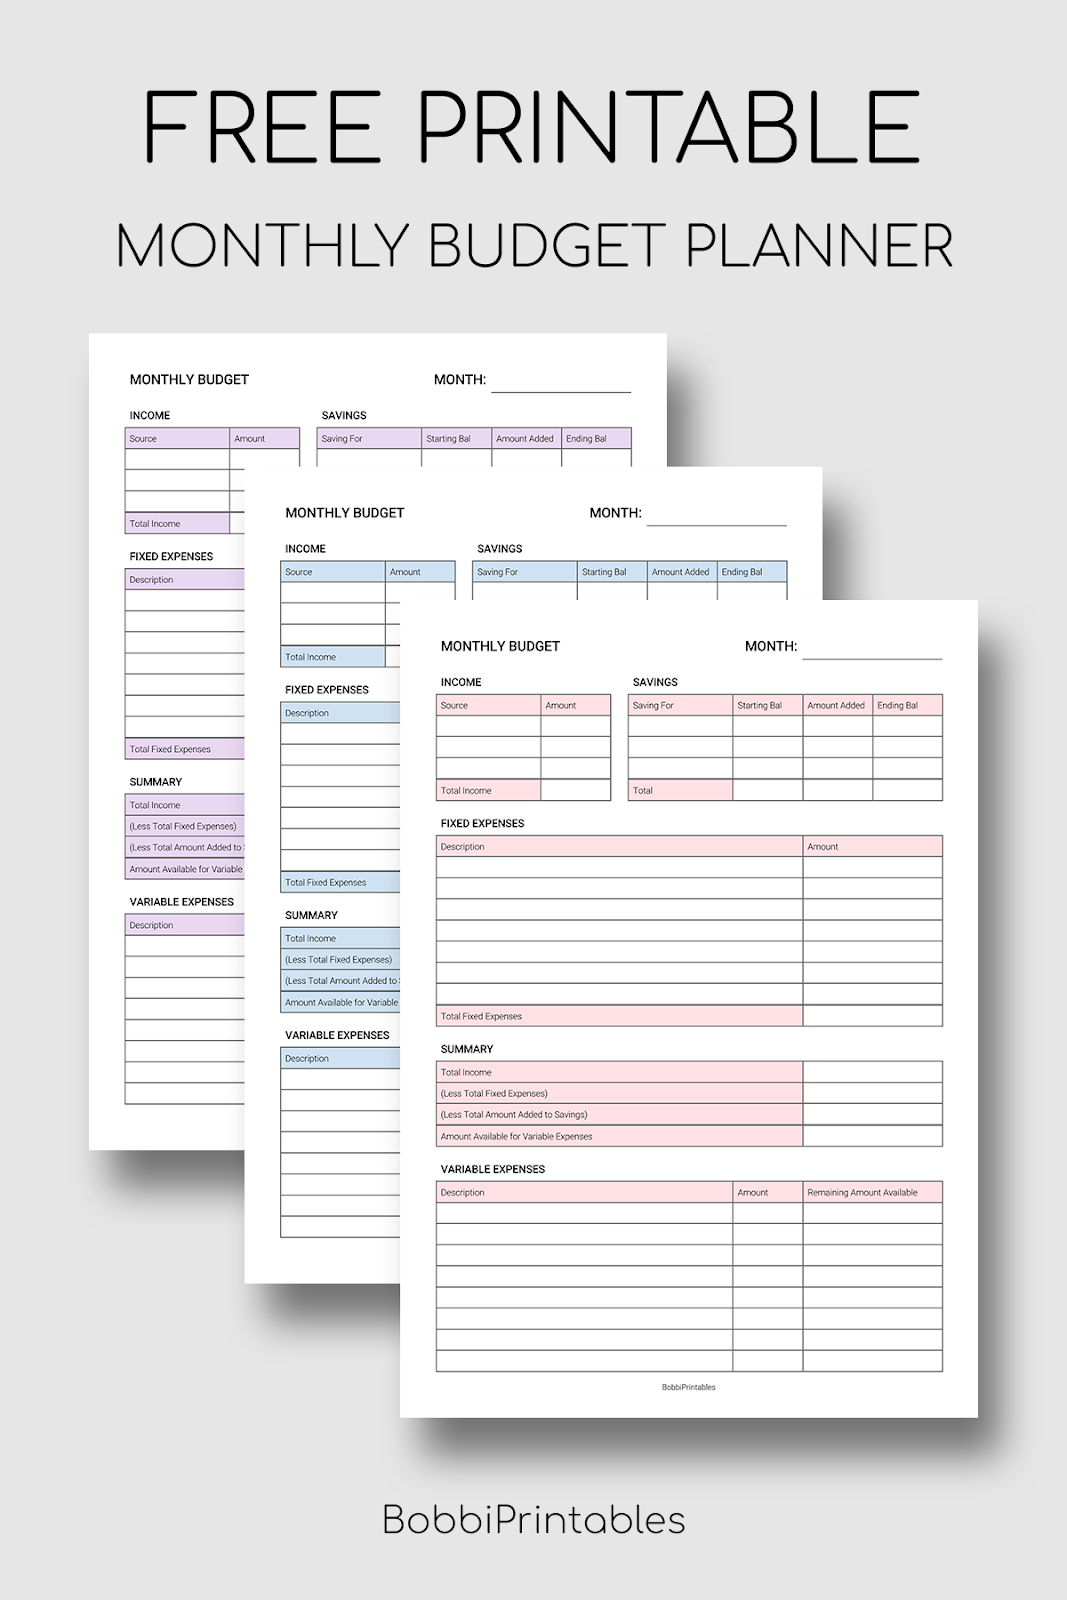 Printable Monthly Budget Planner for Amazing Budget Planner Template For Young Adults